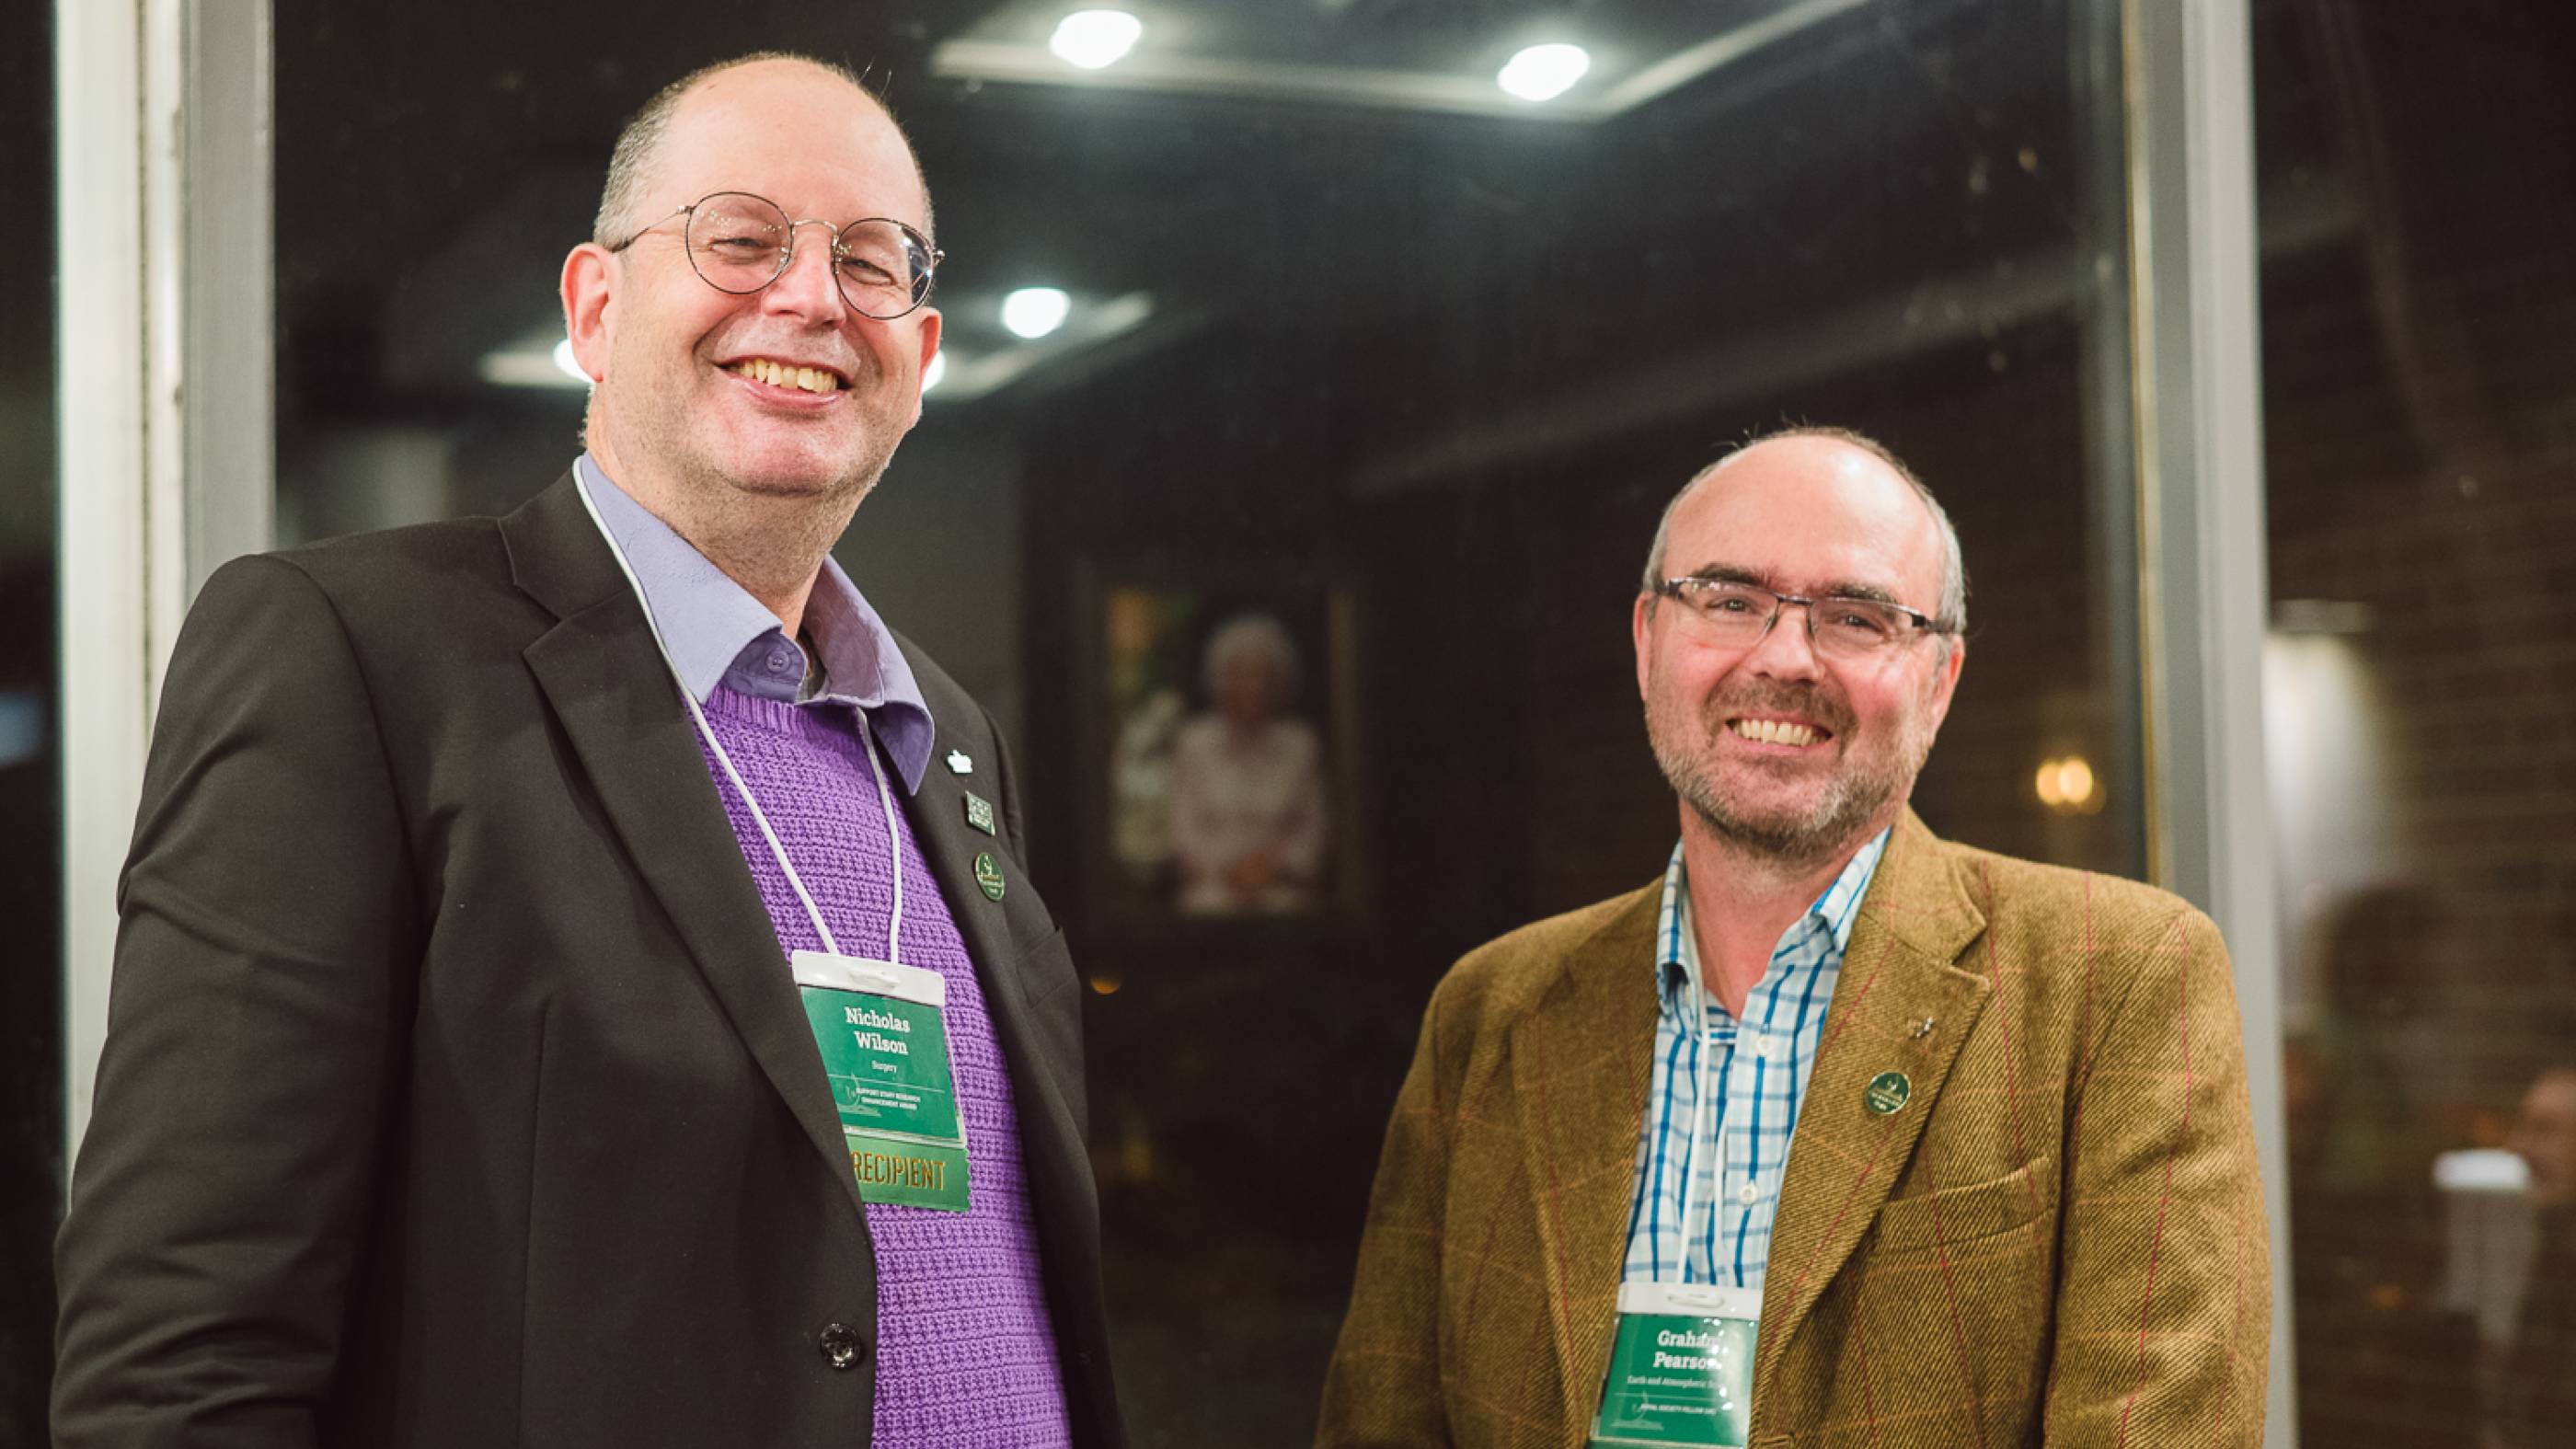 Nicholas Wilson (left), a recipient of the Support Staff Research Enhancement Award and Graham Pearson (right), Royal Society (United Kingdom) Fellow